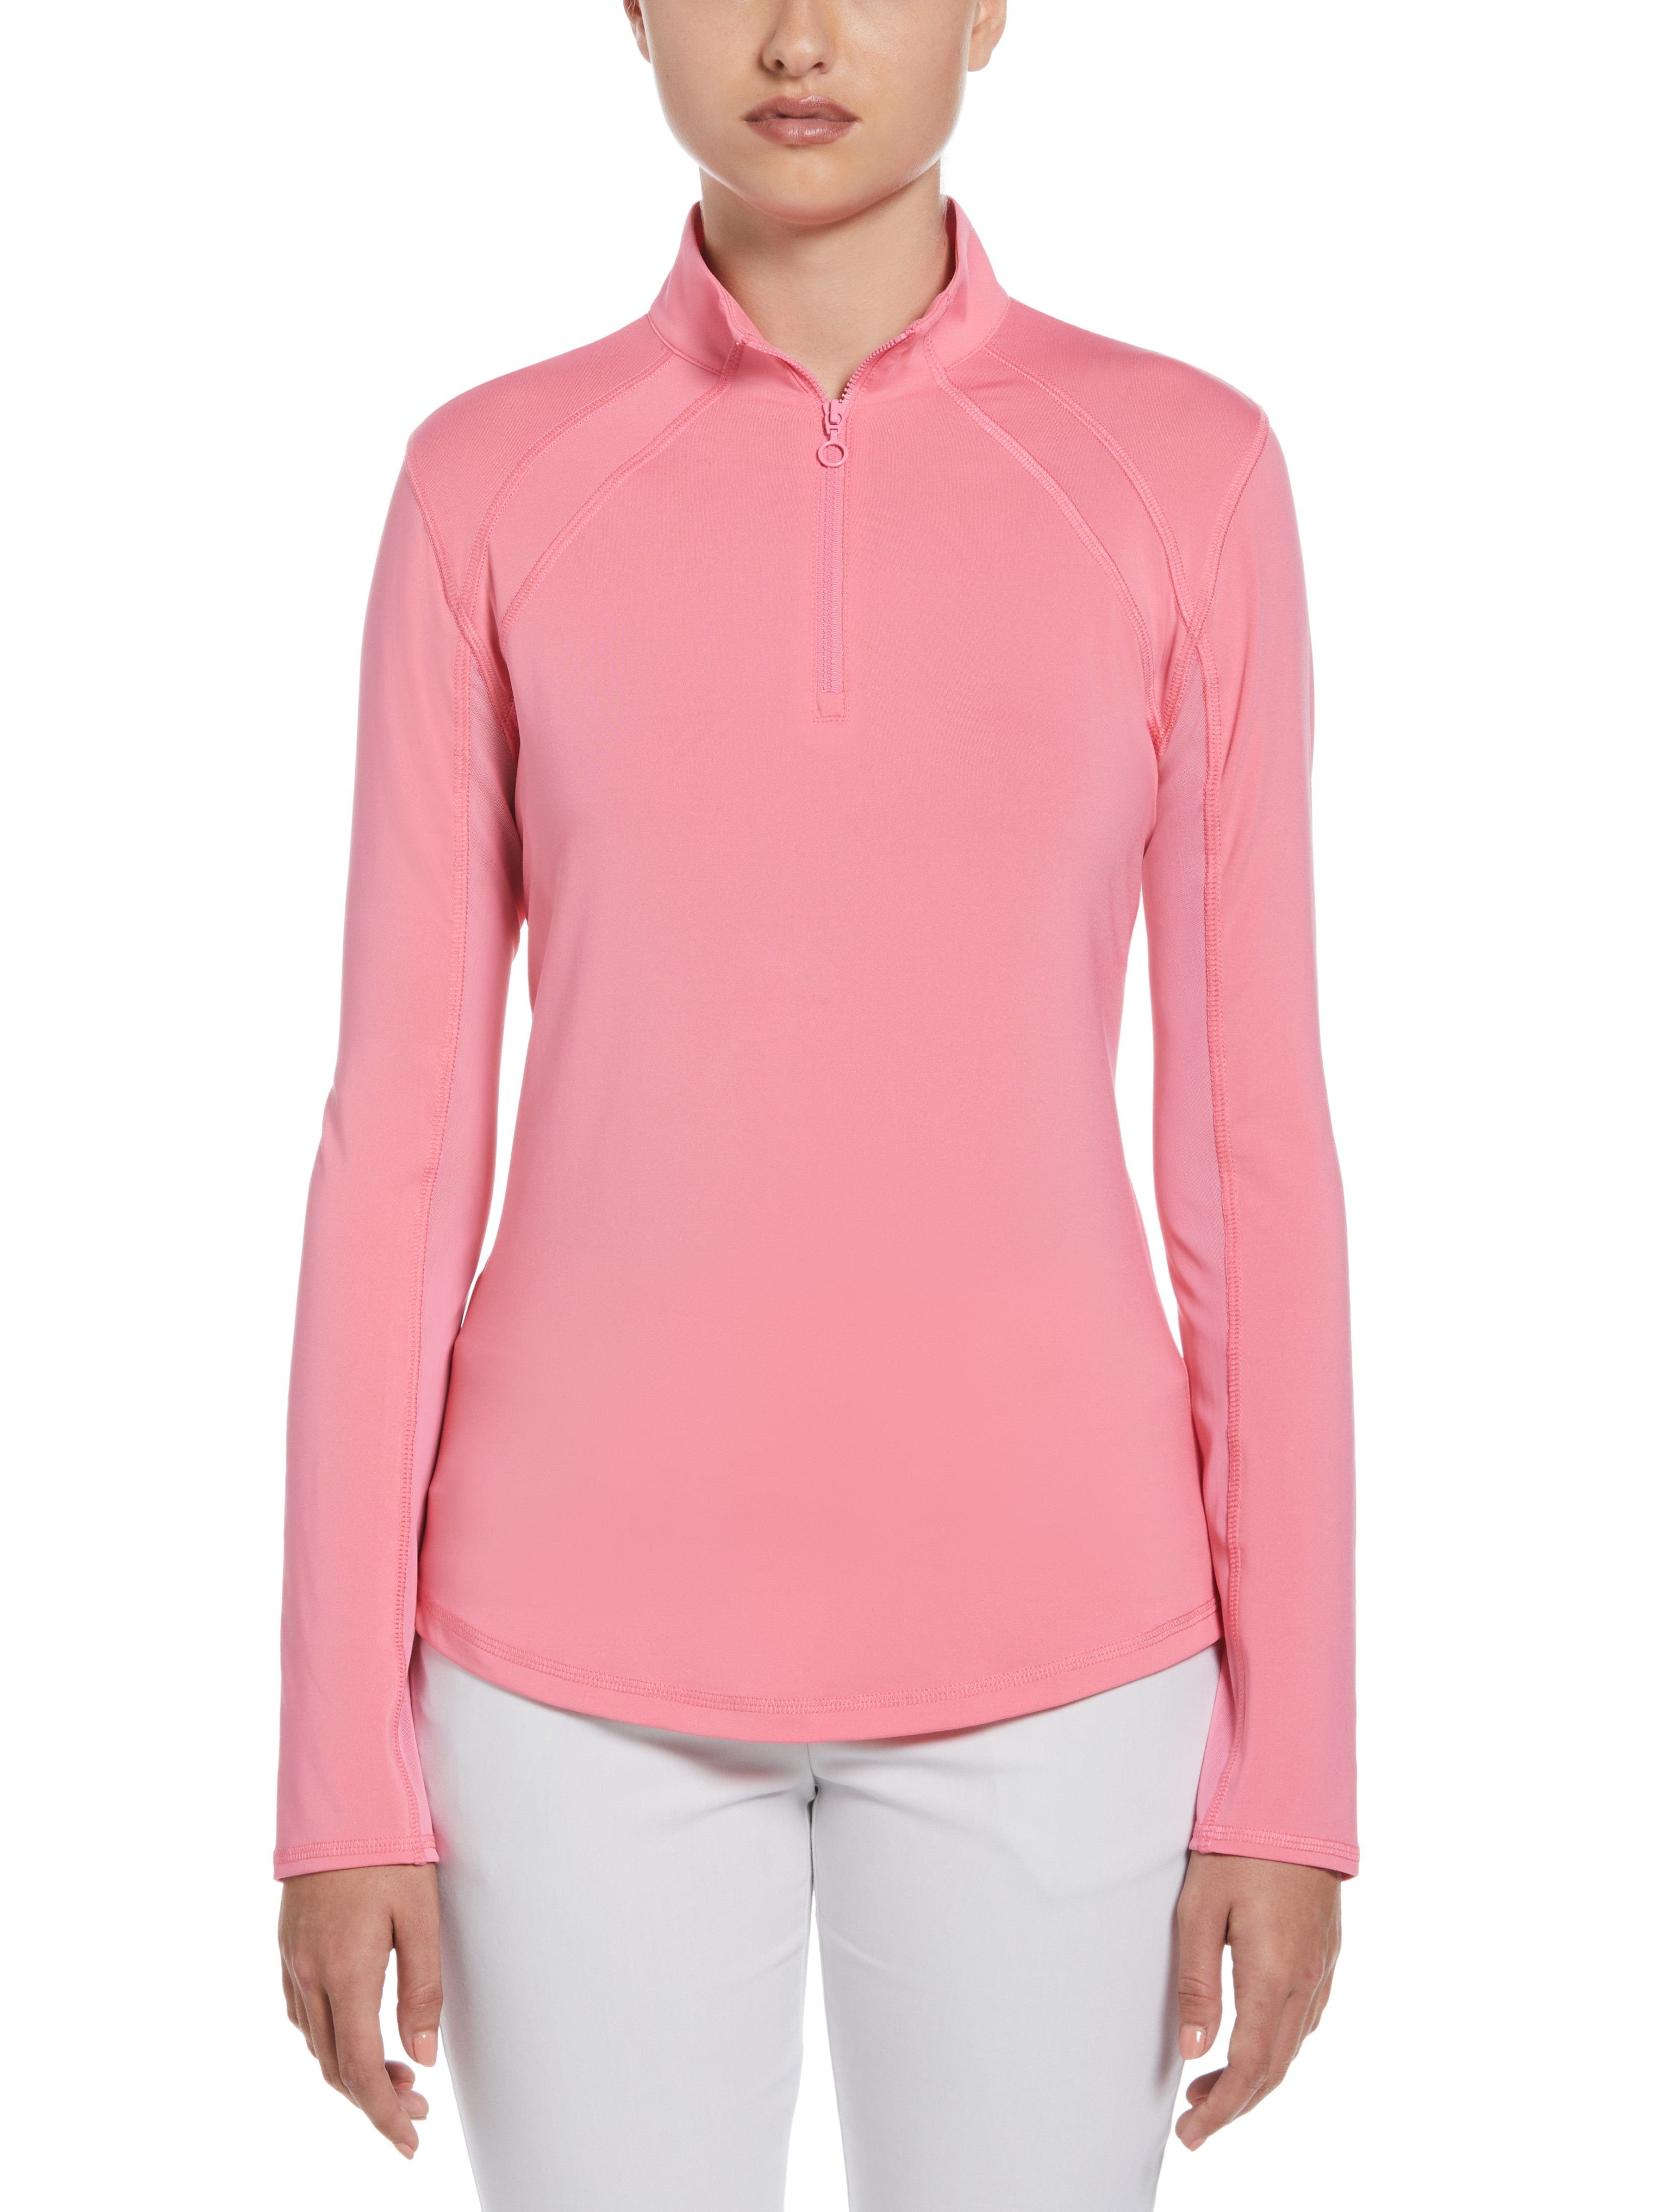 PGA TOUR Apparel Womens Sun Protection Golf Shirt w/ Mesh Panels, Size Small, Flowering Ginger Pink, Polyester/Spandex | Golf Apparel Shop